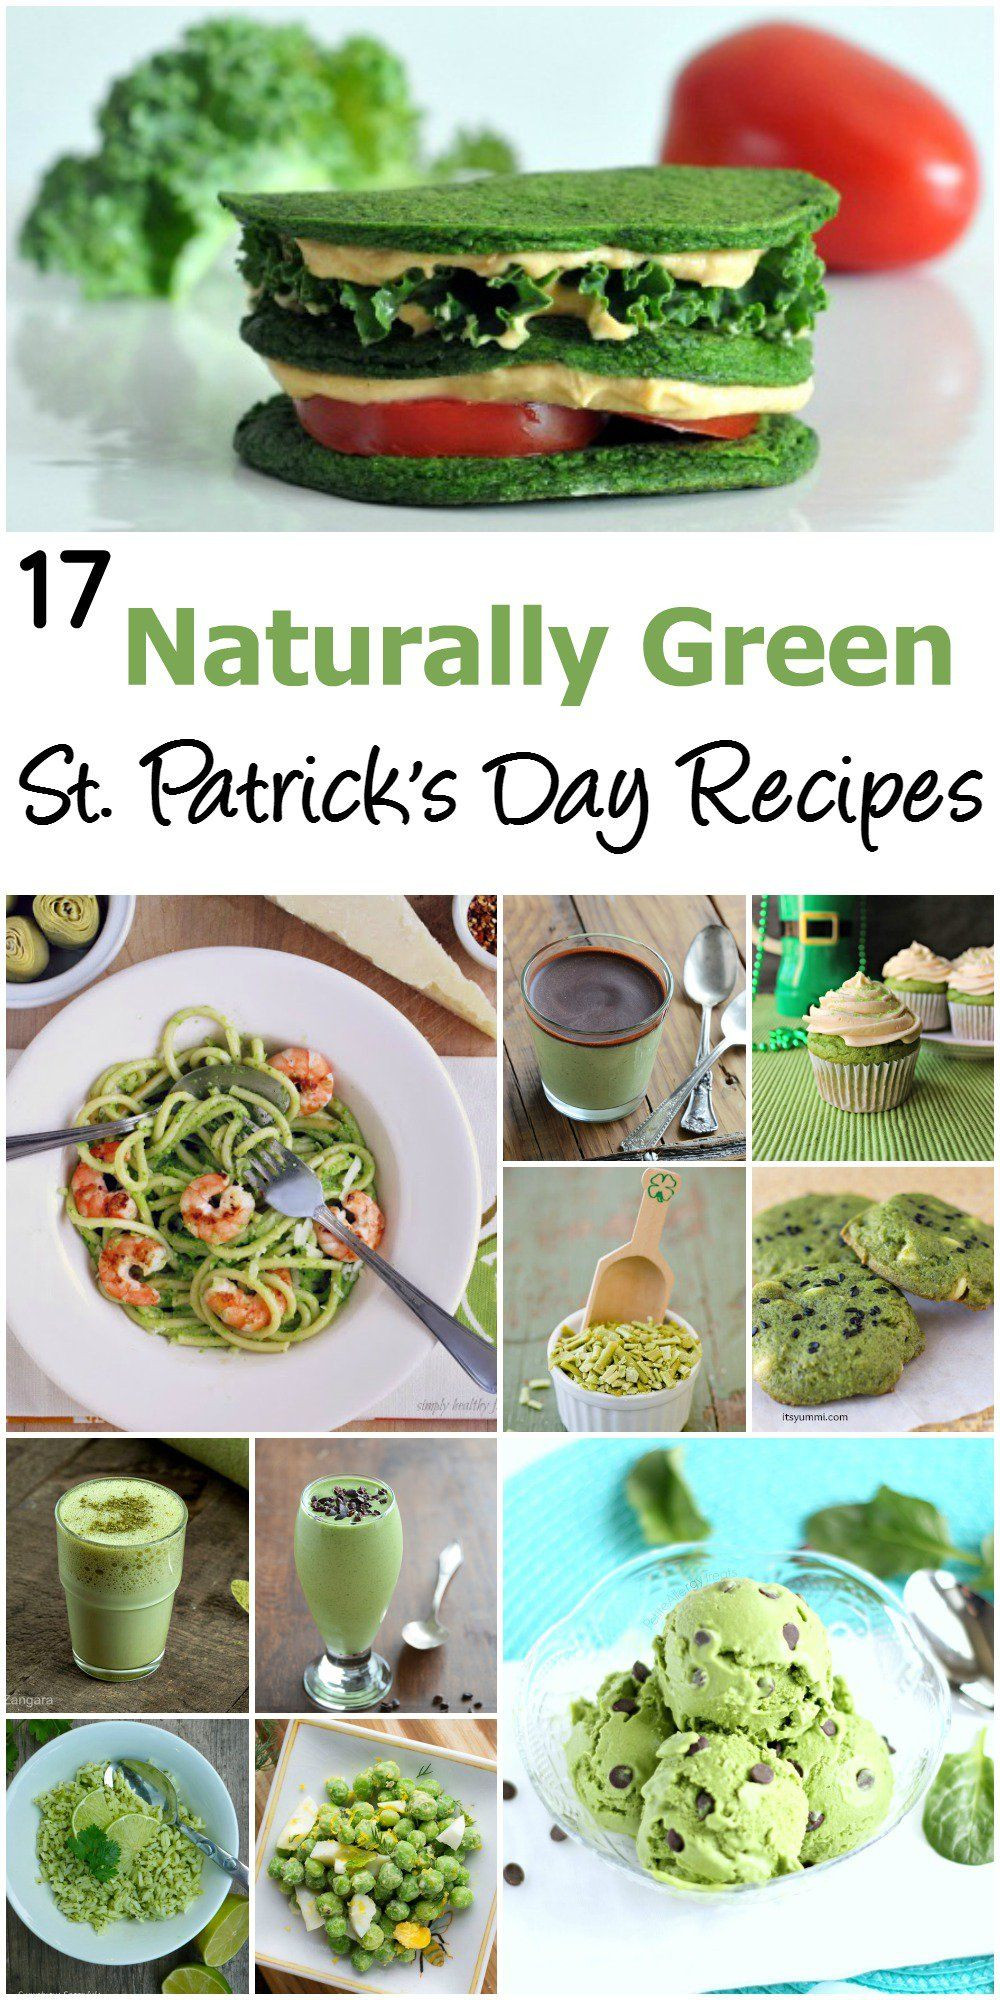 St Patrick'S Day Recipes For Kids
 Naturally Green Recipes for St Patrick s Day 17 for the